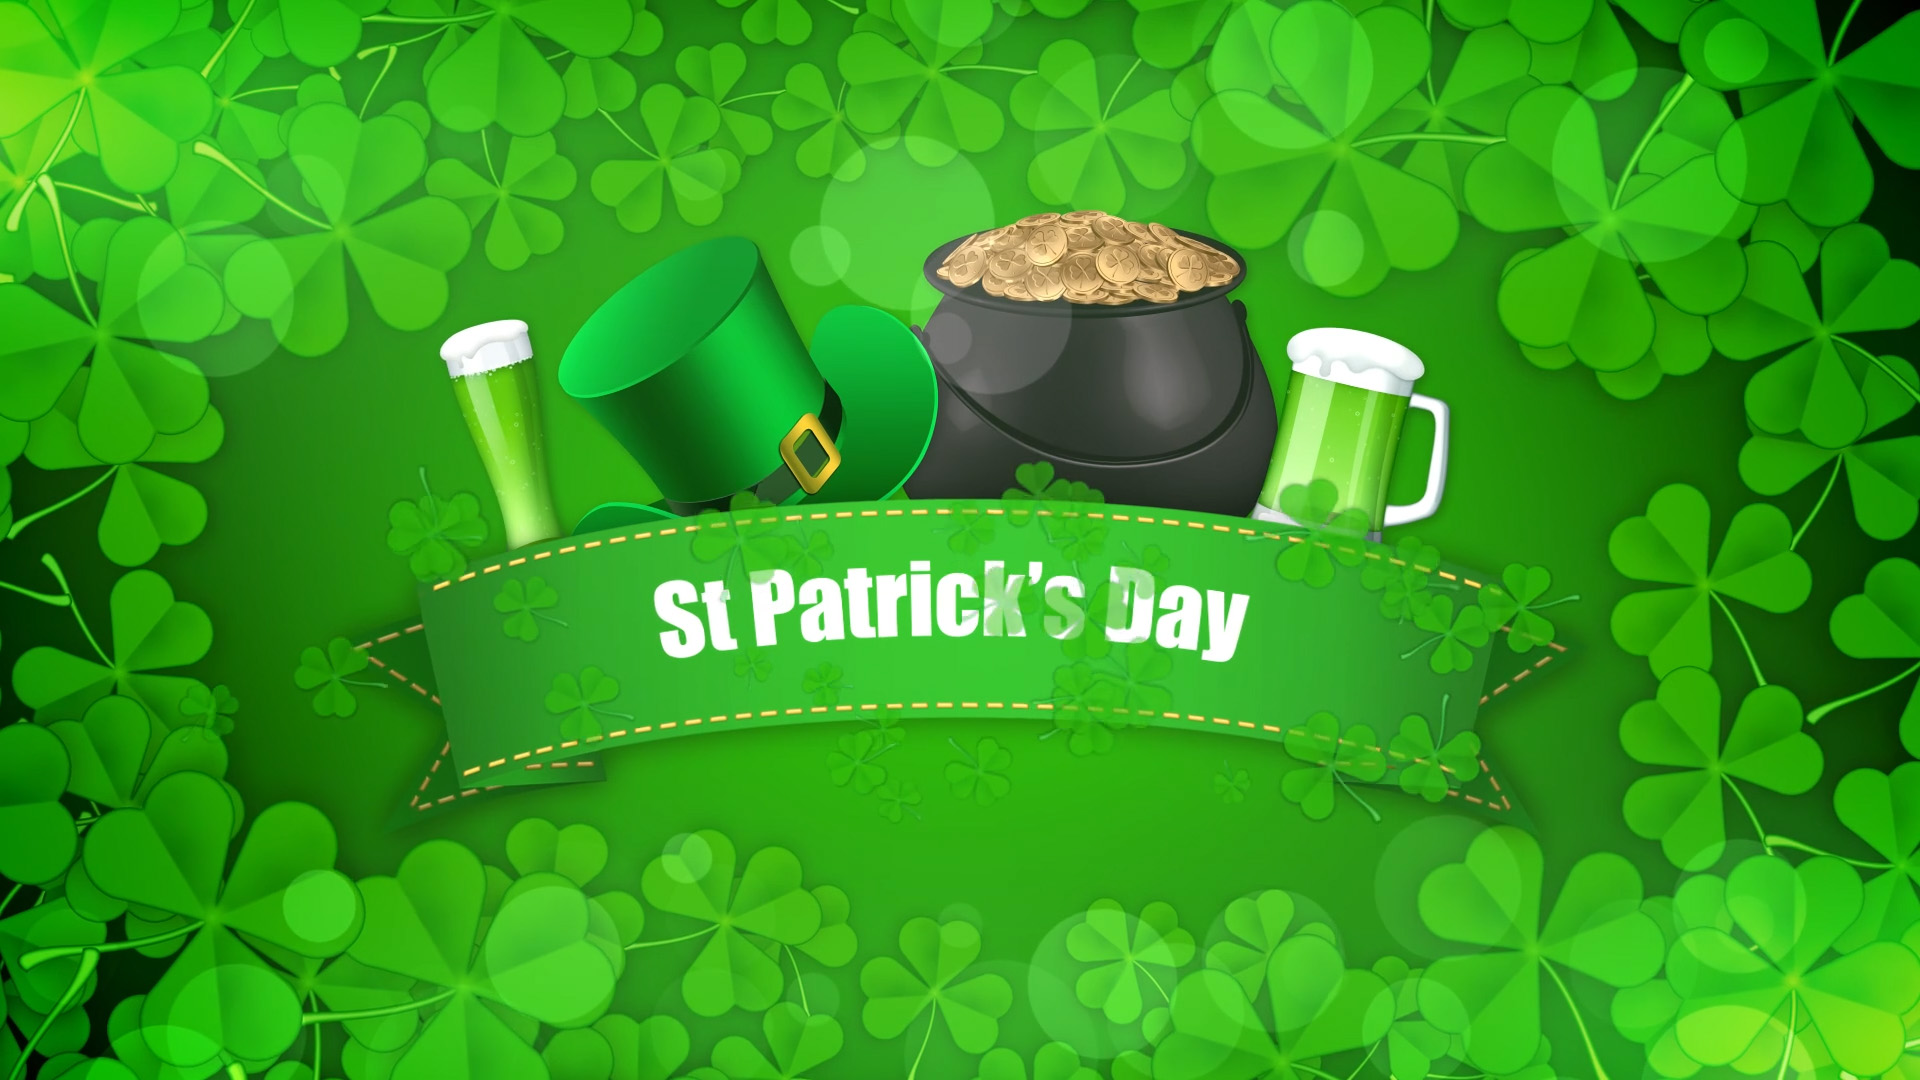 The Brewery – St, Patrick’s Day ad